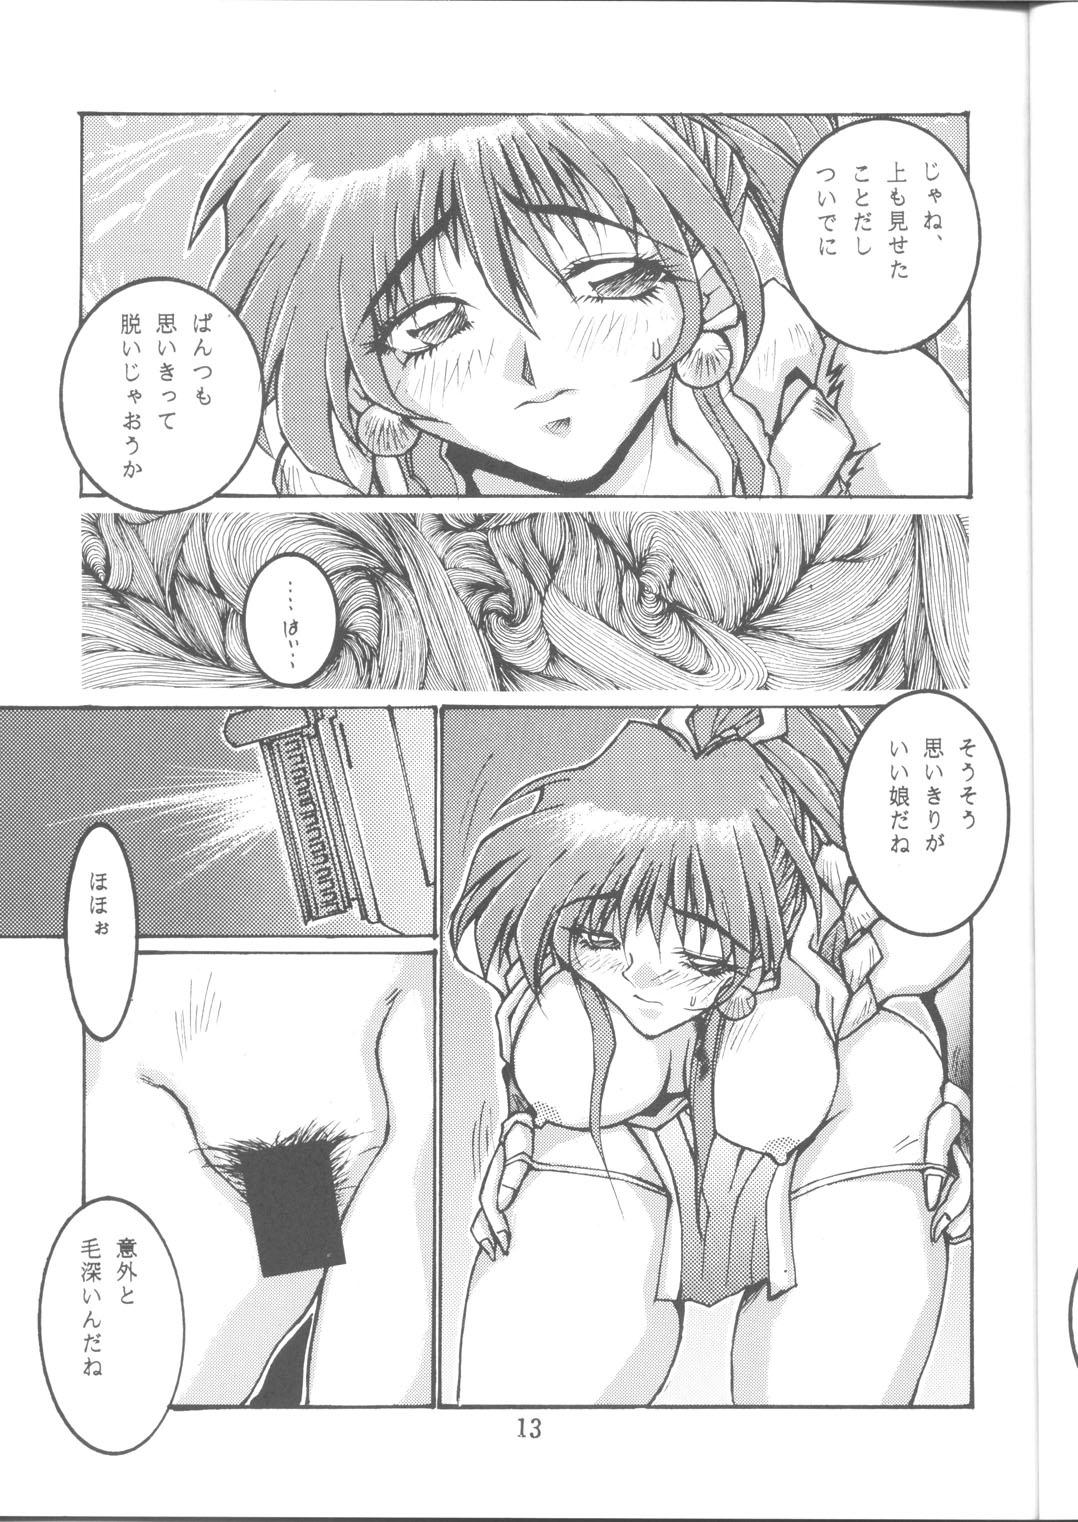 Topless Queen Ninja 2 - King of fighters Woman - Page 12